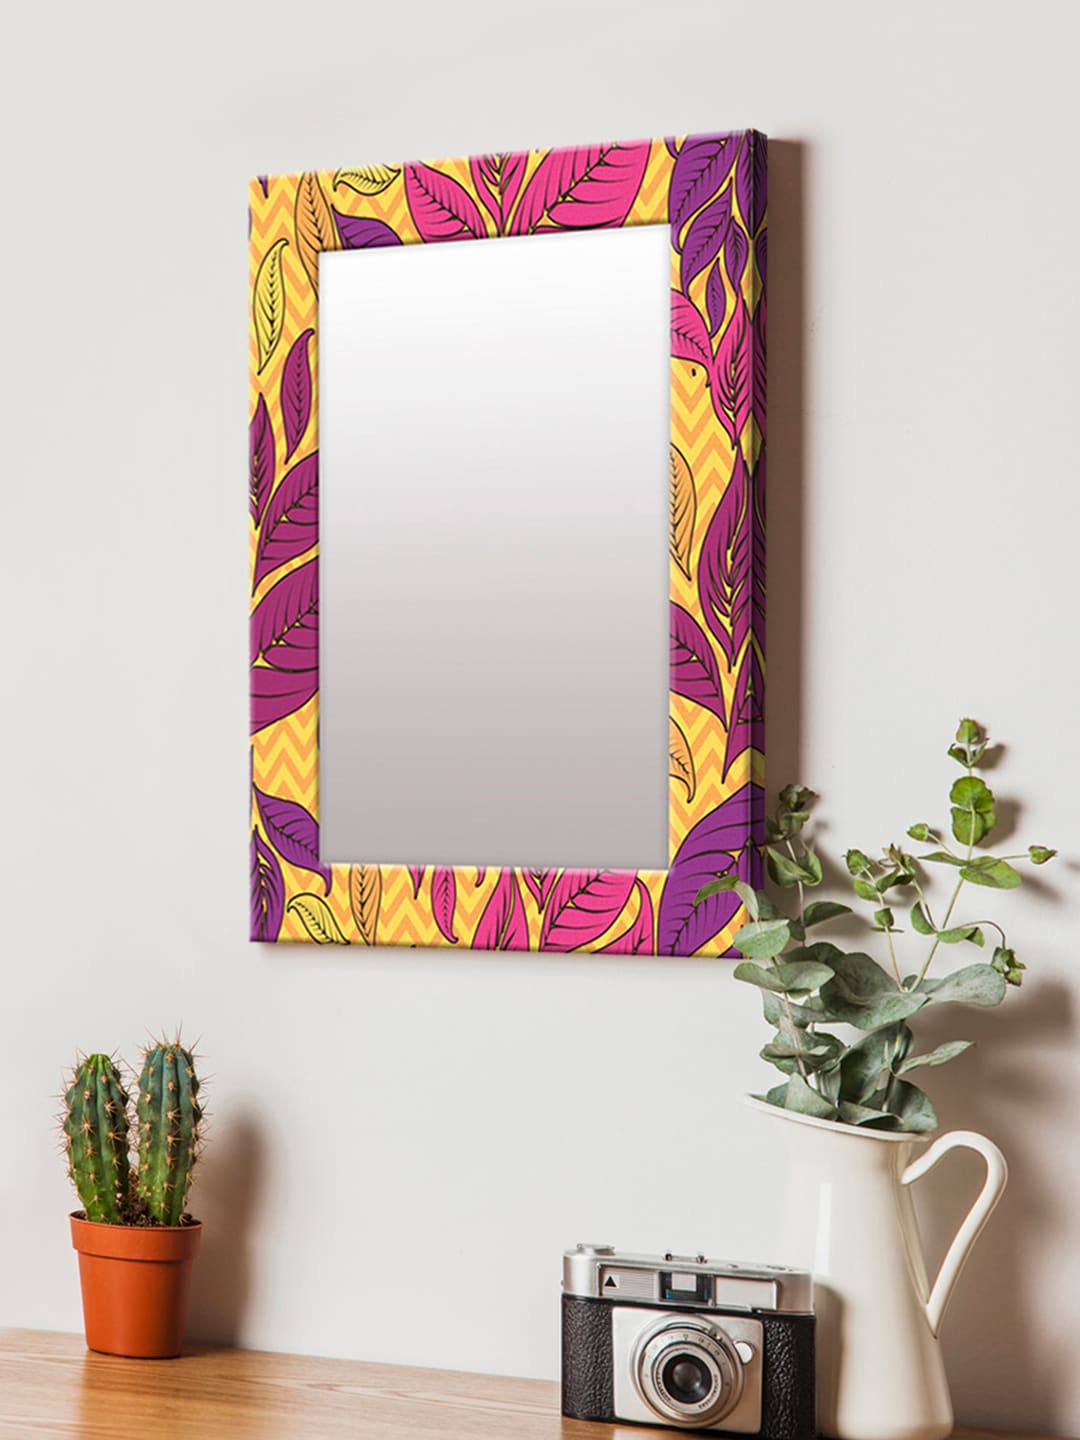 999Store Purple & Yellow Printed MDF Wall Mirror Price in India